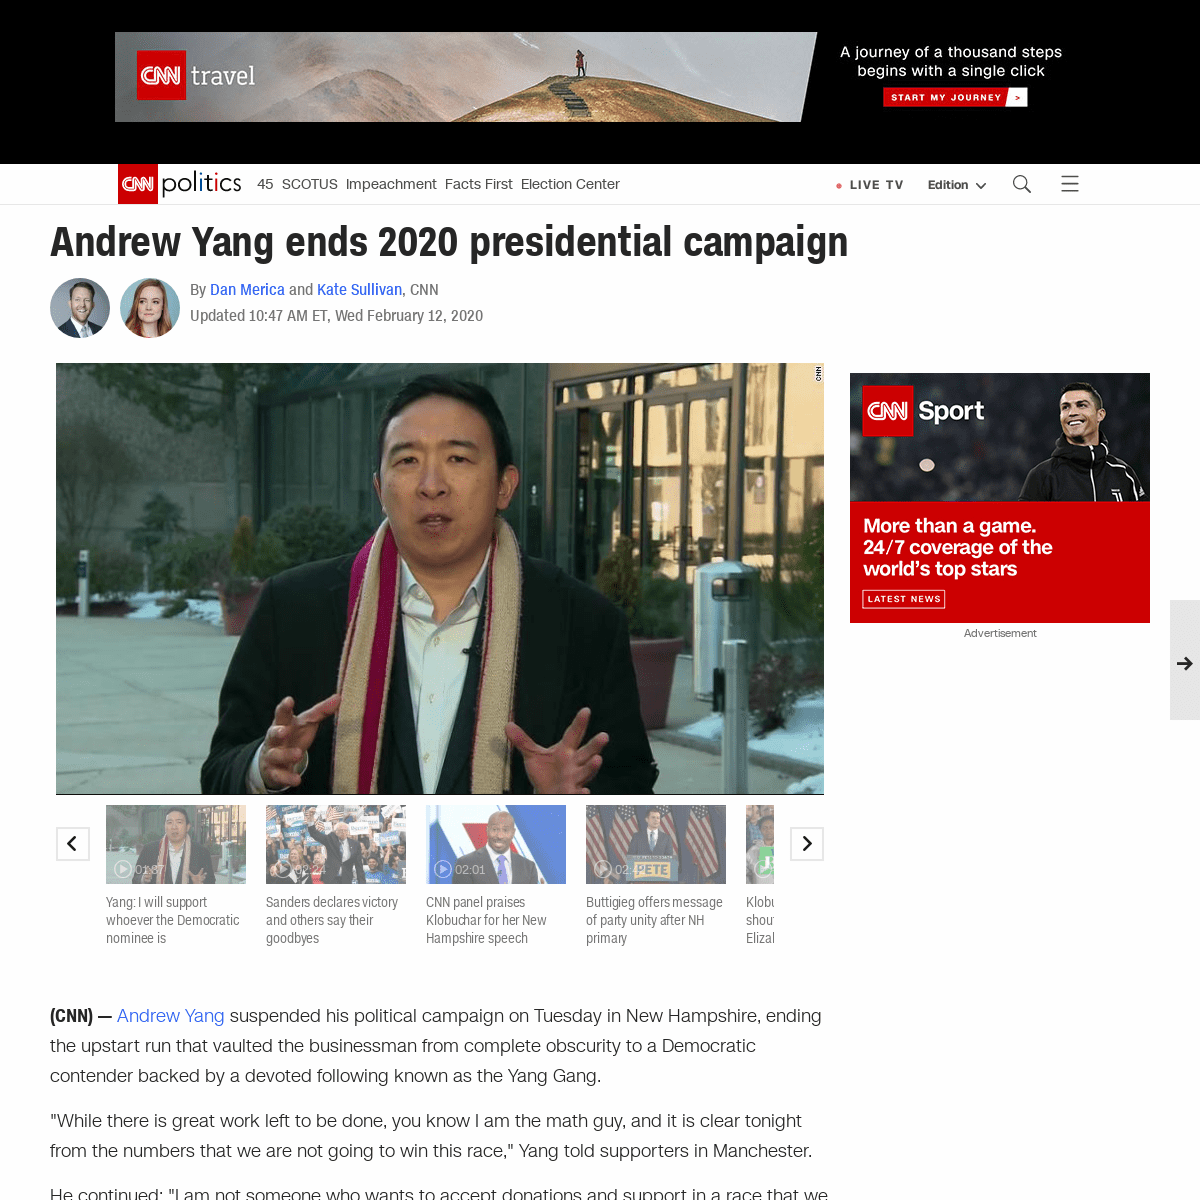 A complete backup of www.cnn.com/2020/02/11/politics/andrew-yang-ends-2020-presidential-campaign/index.html